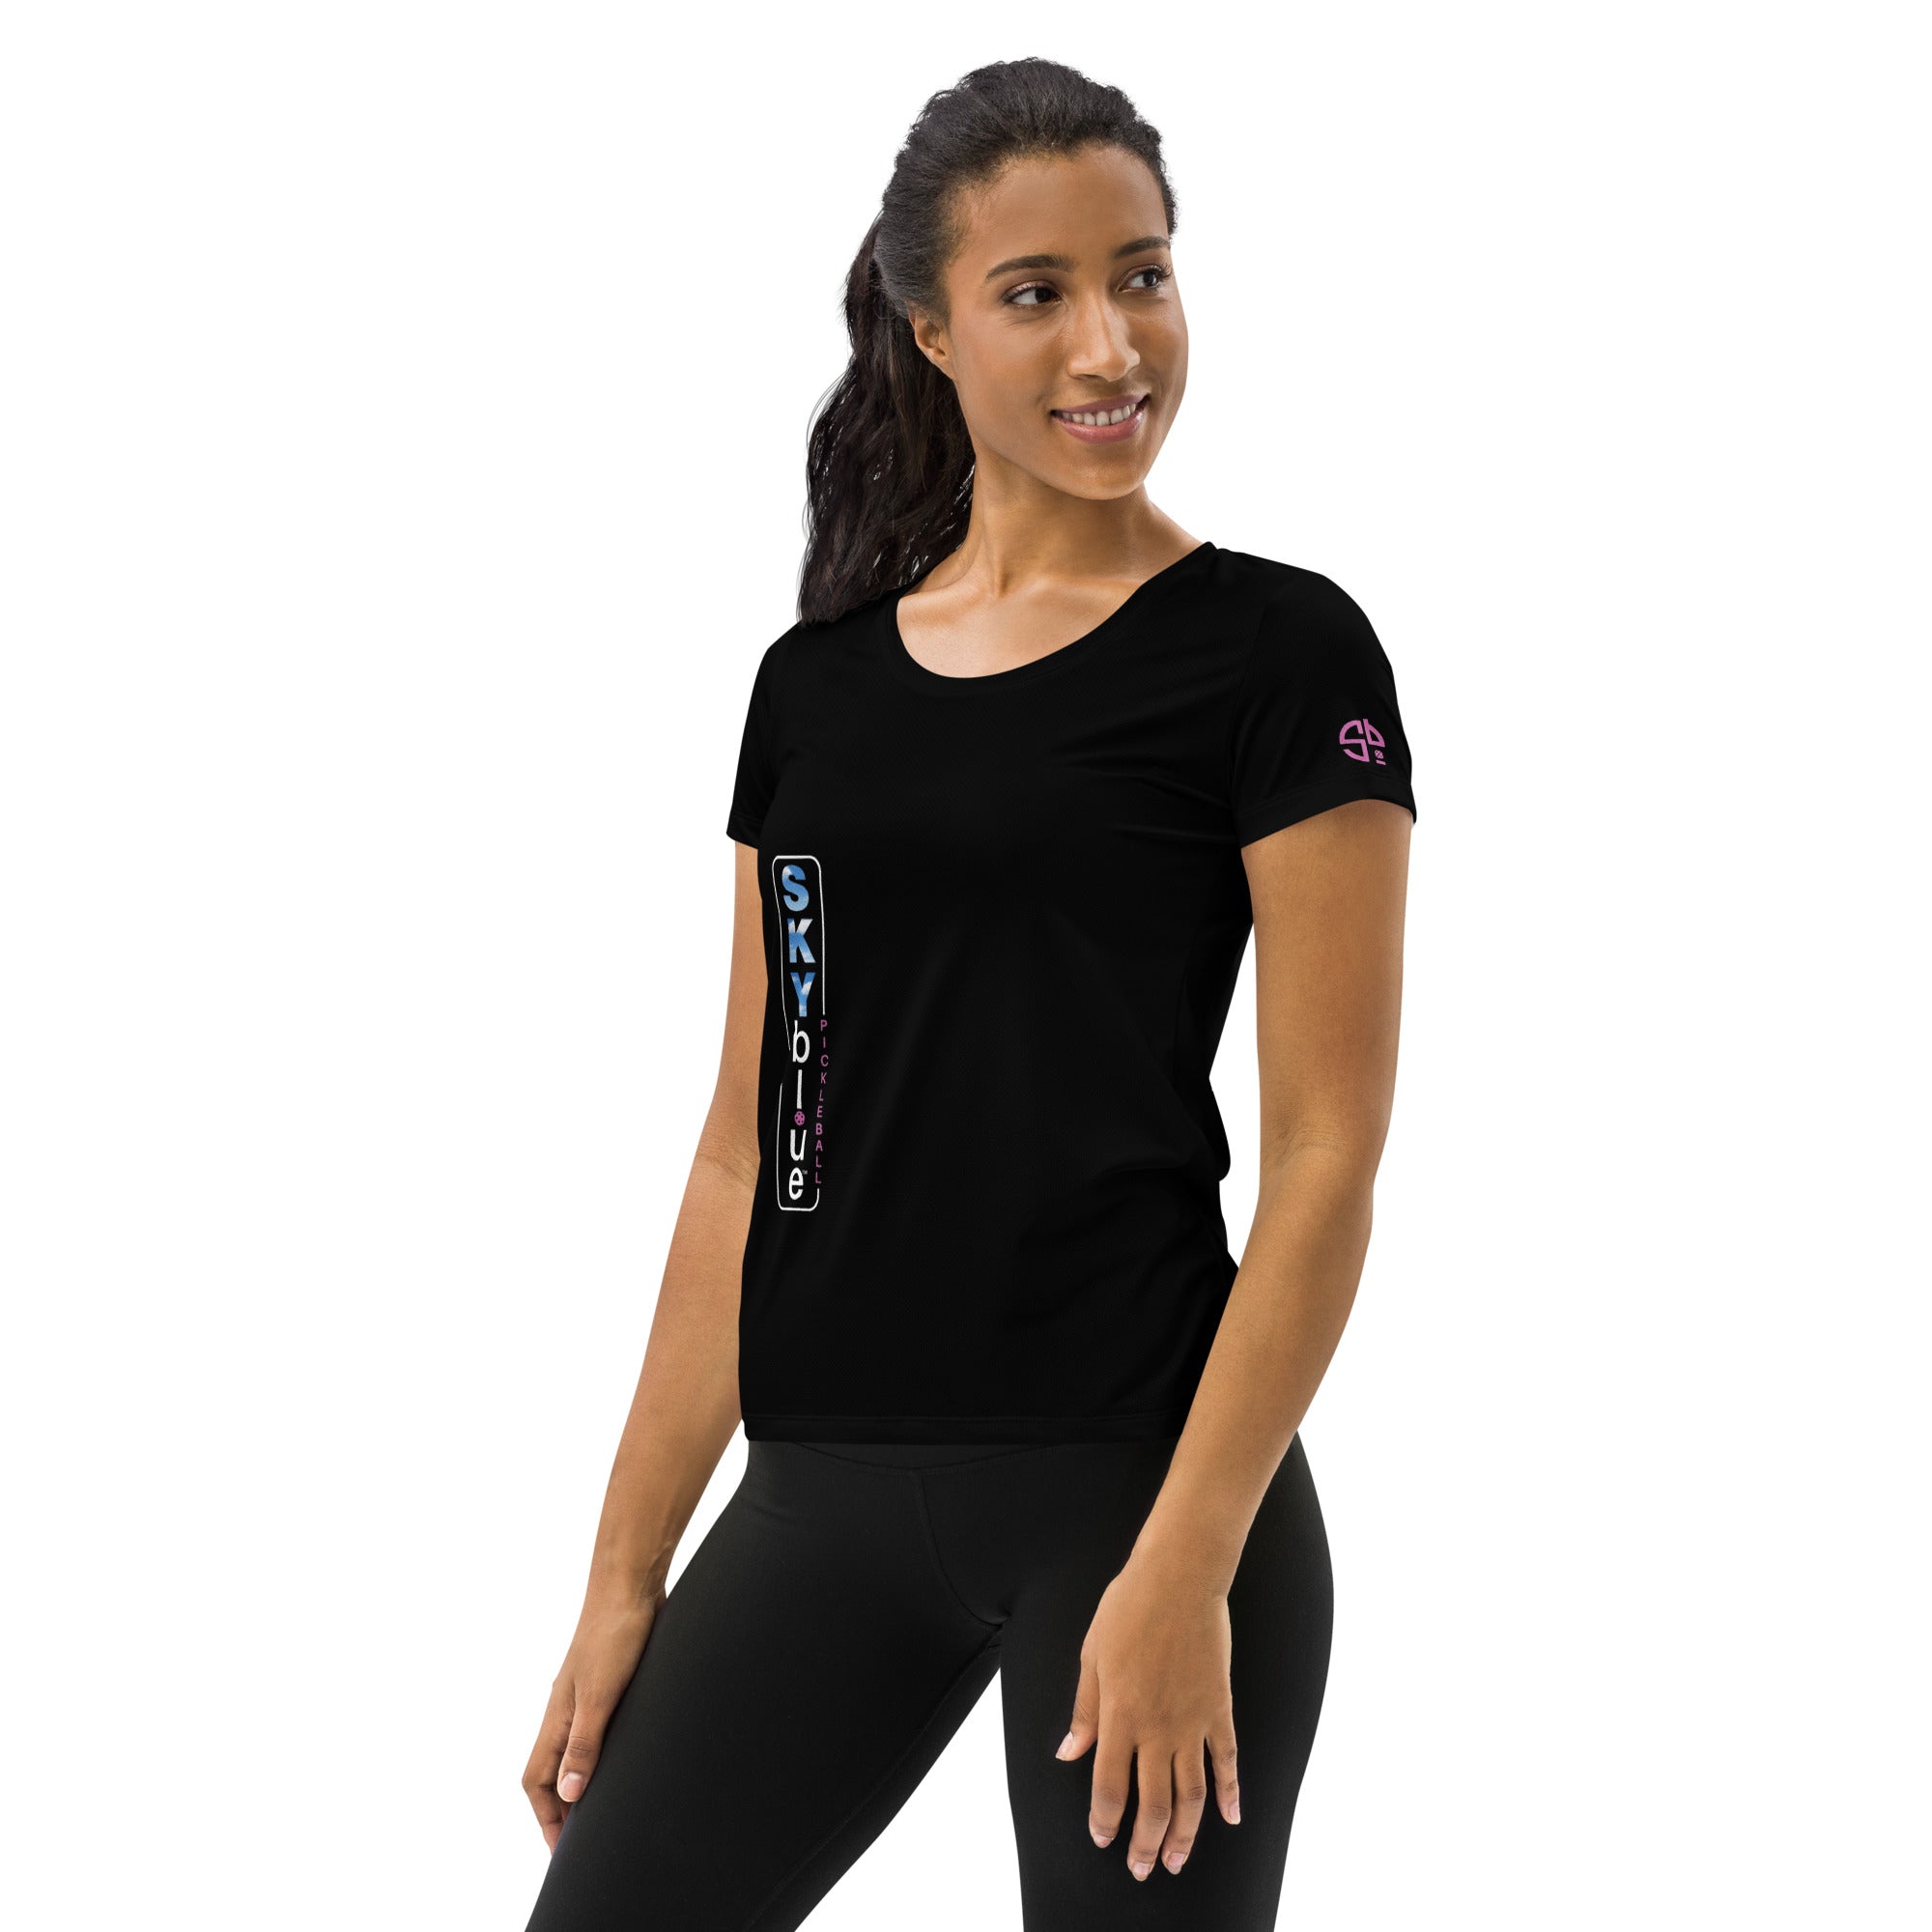 SKYblue™ Black Women's Performance Athletic T-Shirt for Pickleball Enthusiasts - Play Pickleball in Style! for Got Pla(yed)id Beige, Black & Pink